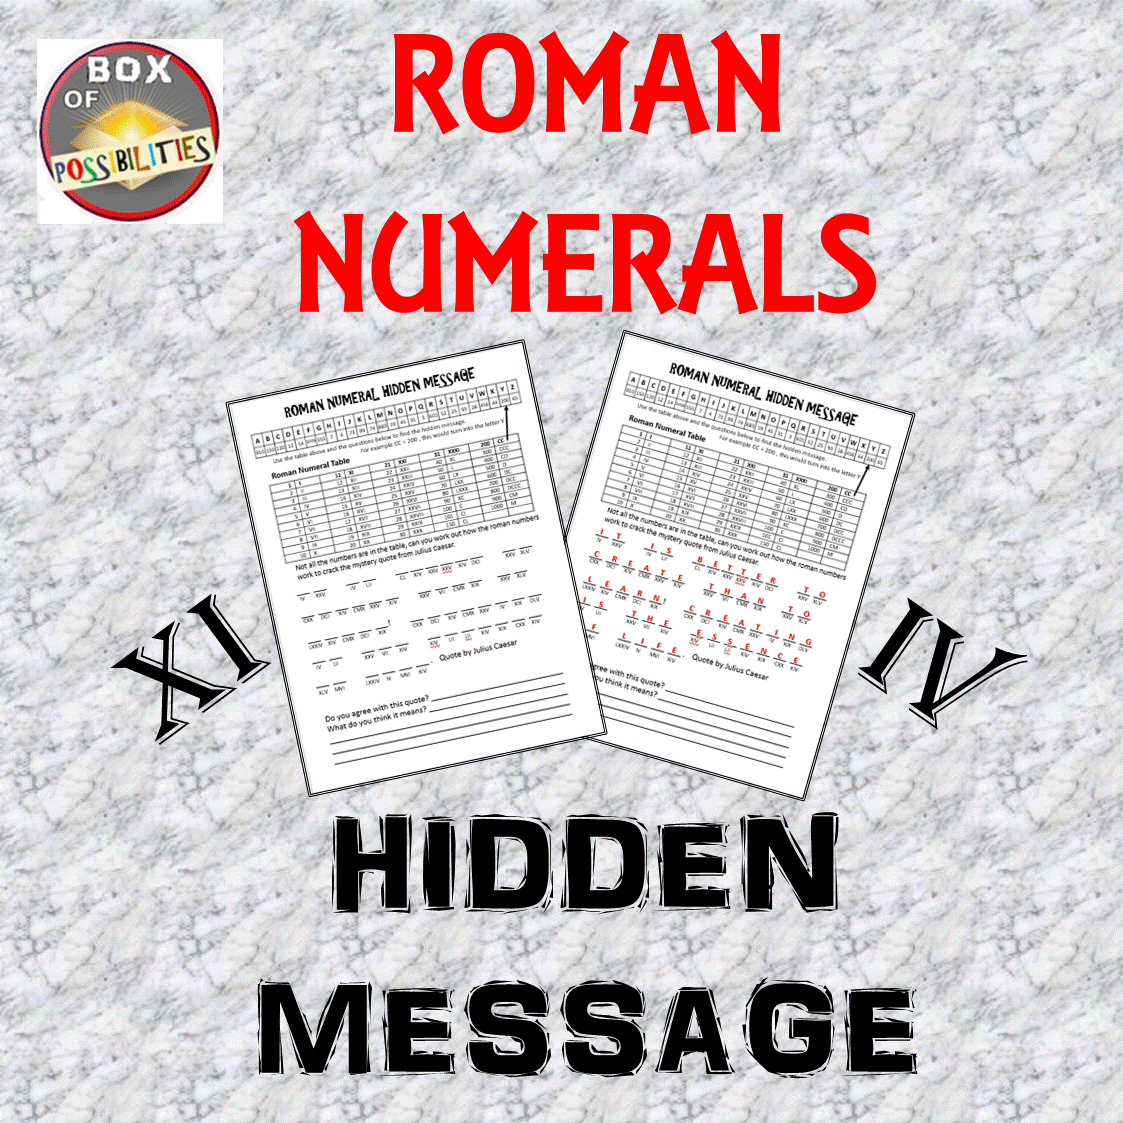 Roman Numerals Hidden Message Activity FREE ACTIVITY Make learning about Roman numerals fun with this hidden message from Julius Caesar. Your kids will love cracking this code. In cracking this code they will learn how to read Roman numerals. An awesome learning activity for elementary kids which can be used in your classroom as a math warm-up, early finisher activity, or in a math center. #romannumerals #free #funmath #5thgrade #4thgrade #6thgrade